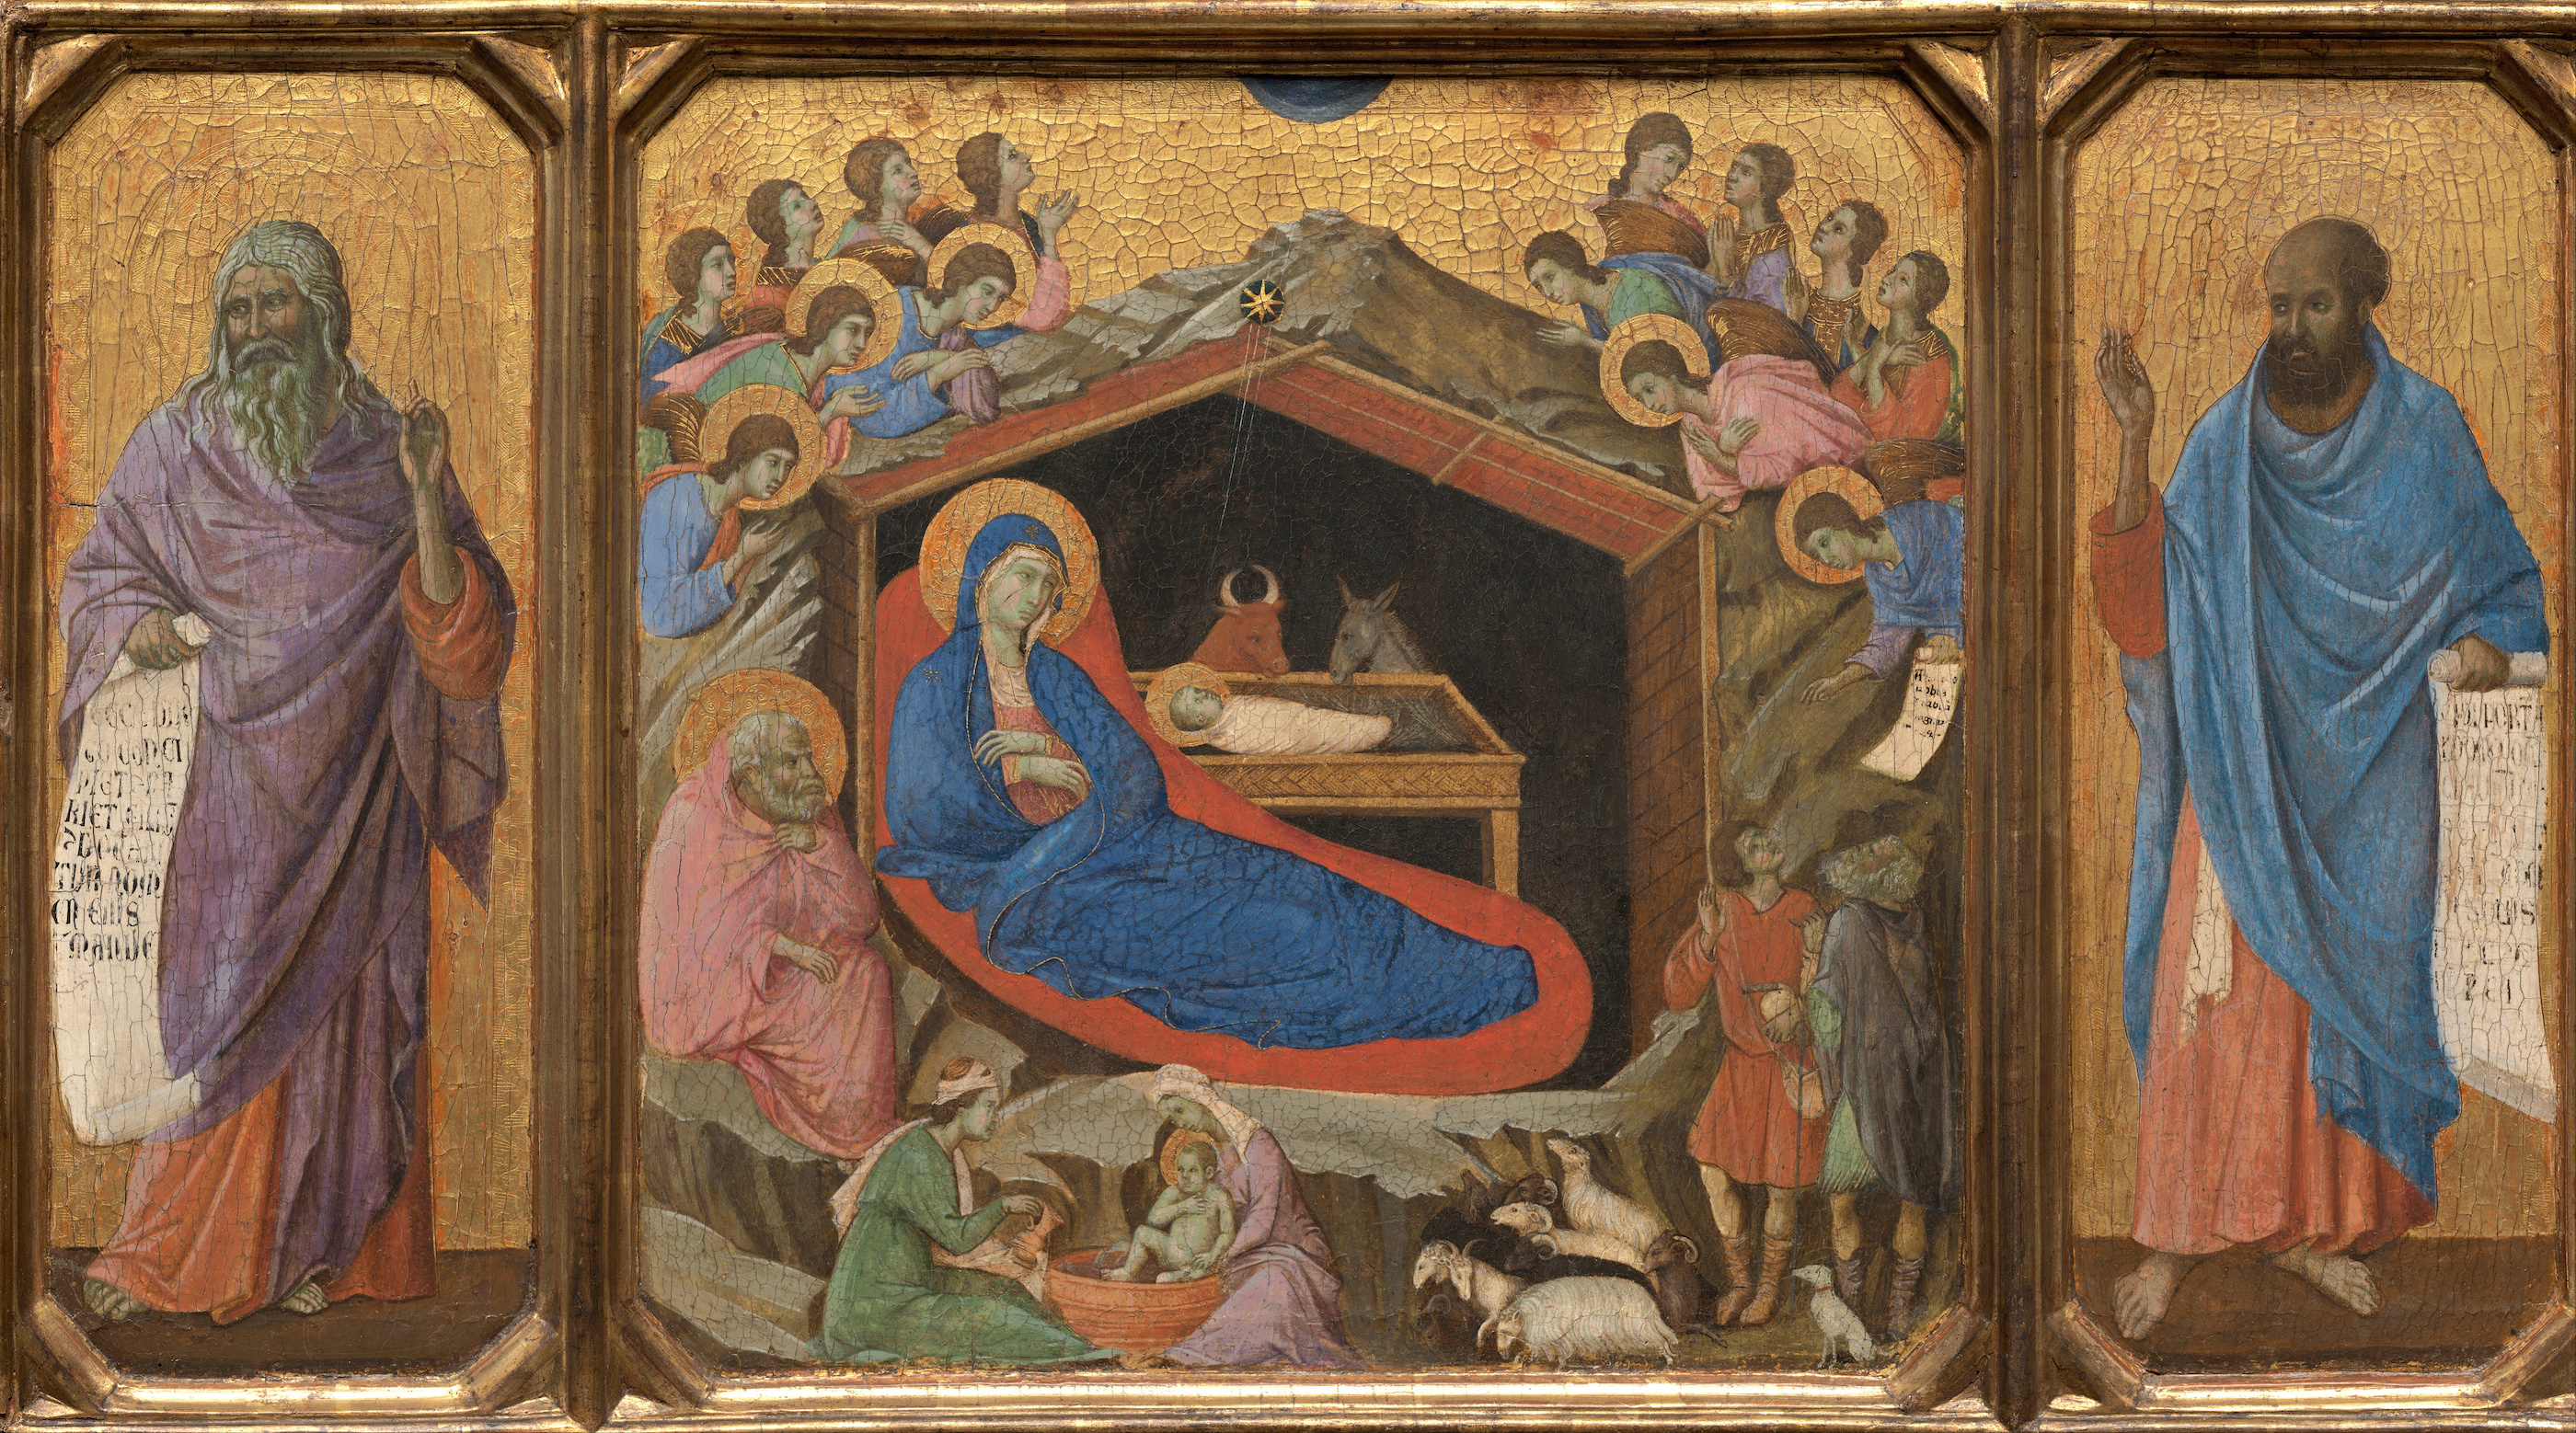 The Nativity with the Prophets Isaiah and Ezekiel by Duccio di Buoninsegna - 1308 - 1311 - 870 x 480 cm National Gallery of Art